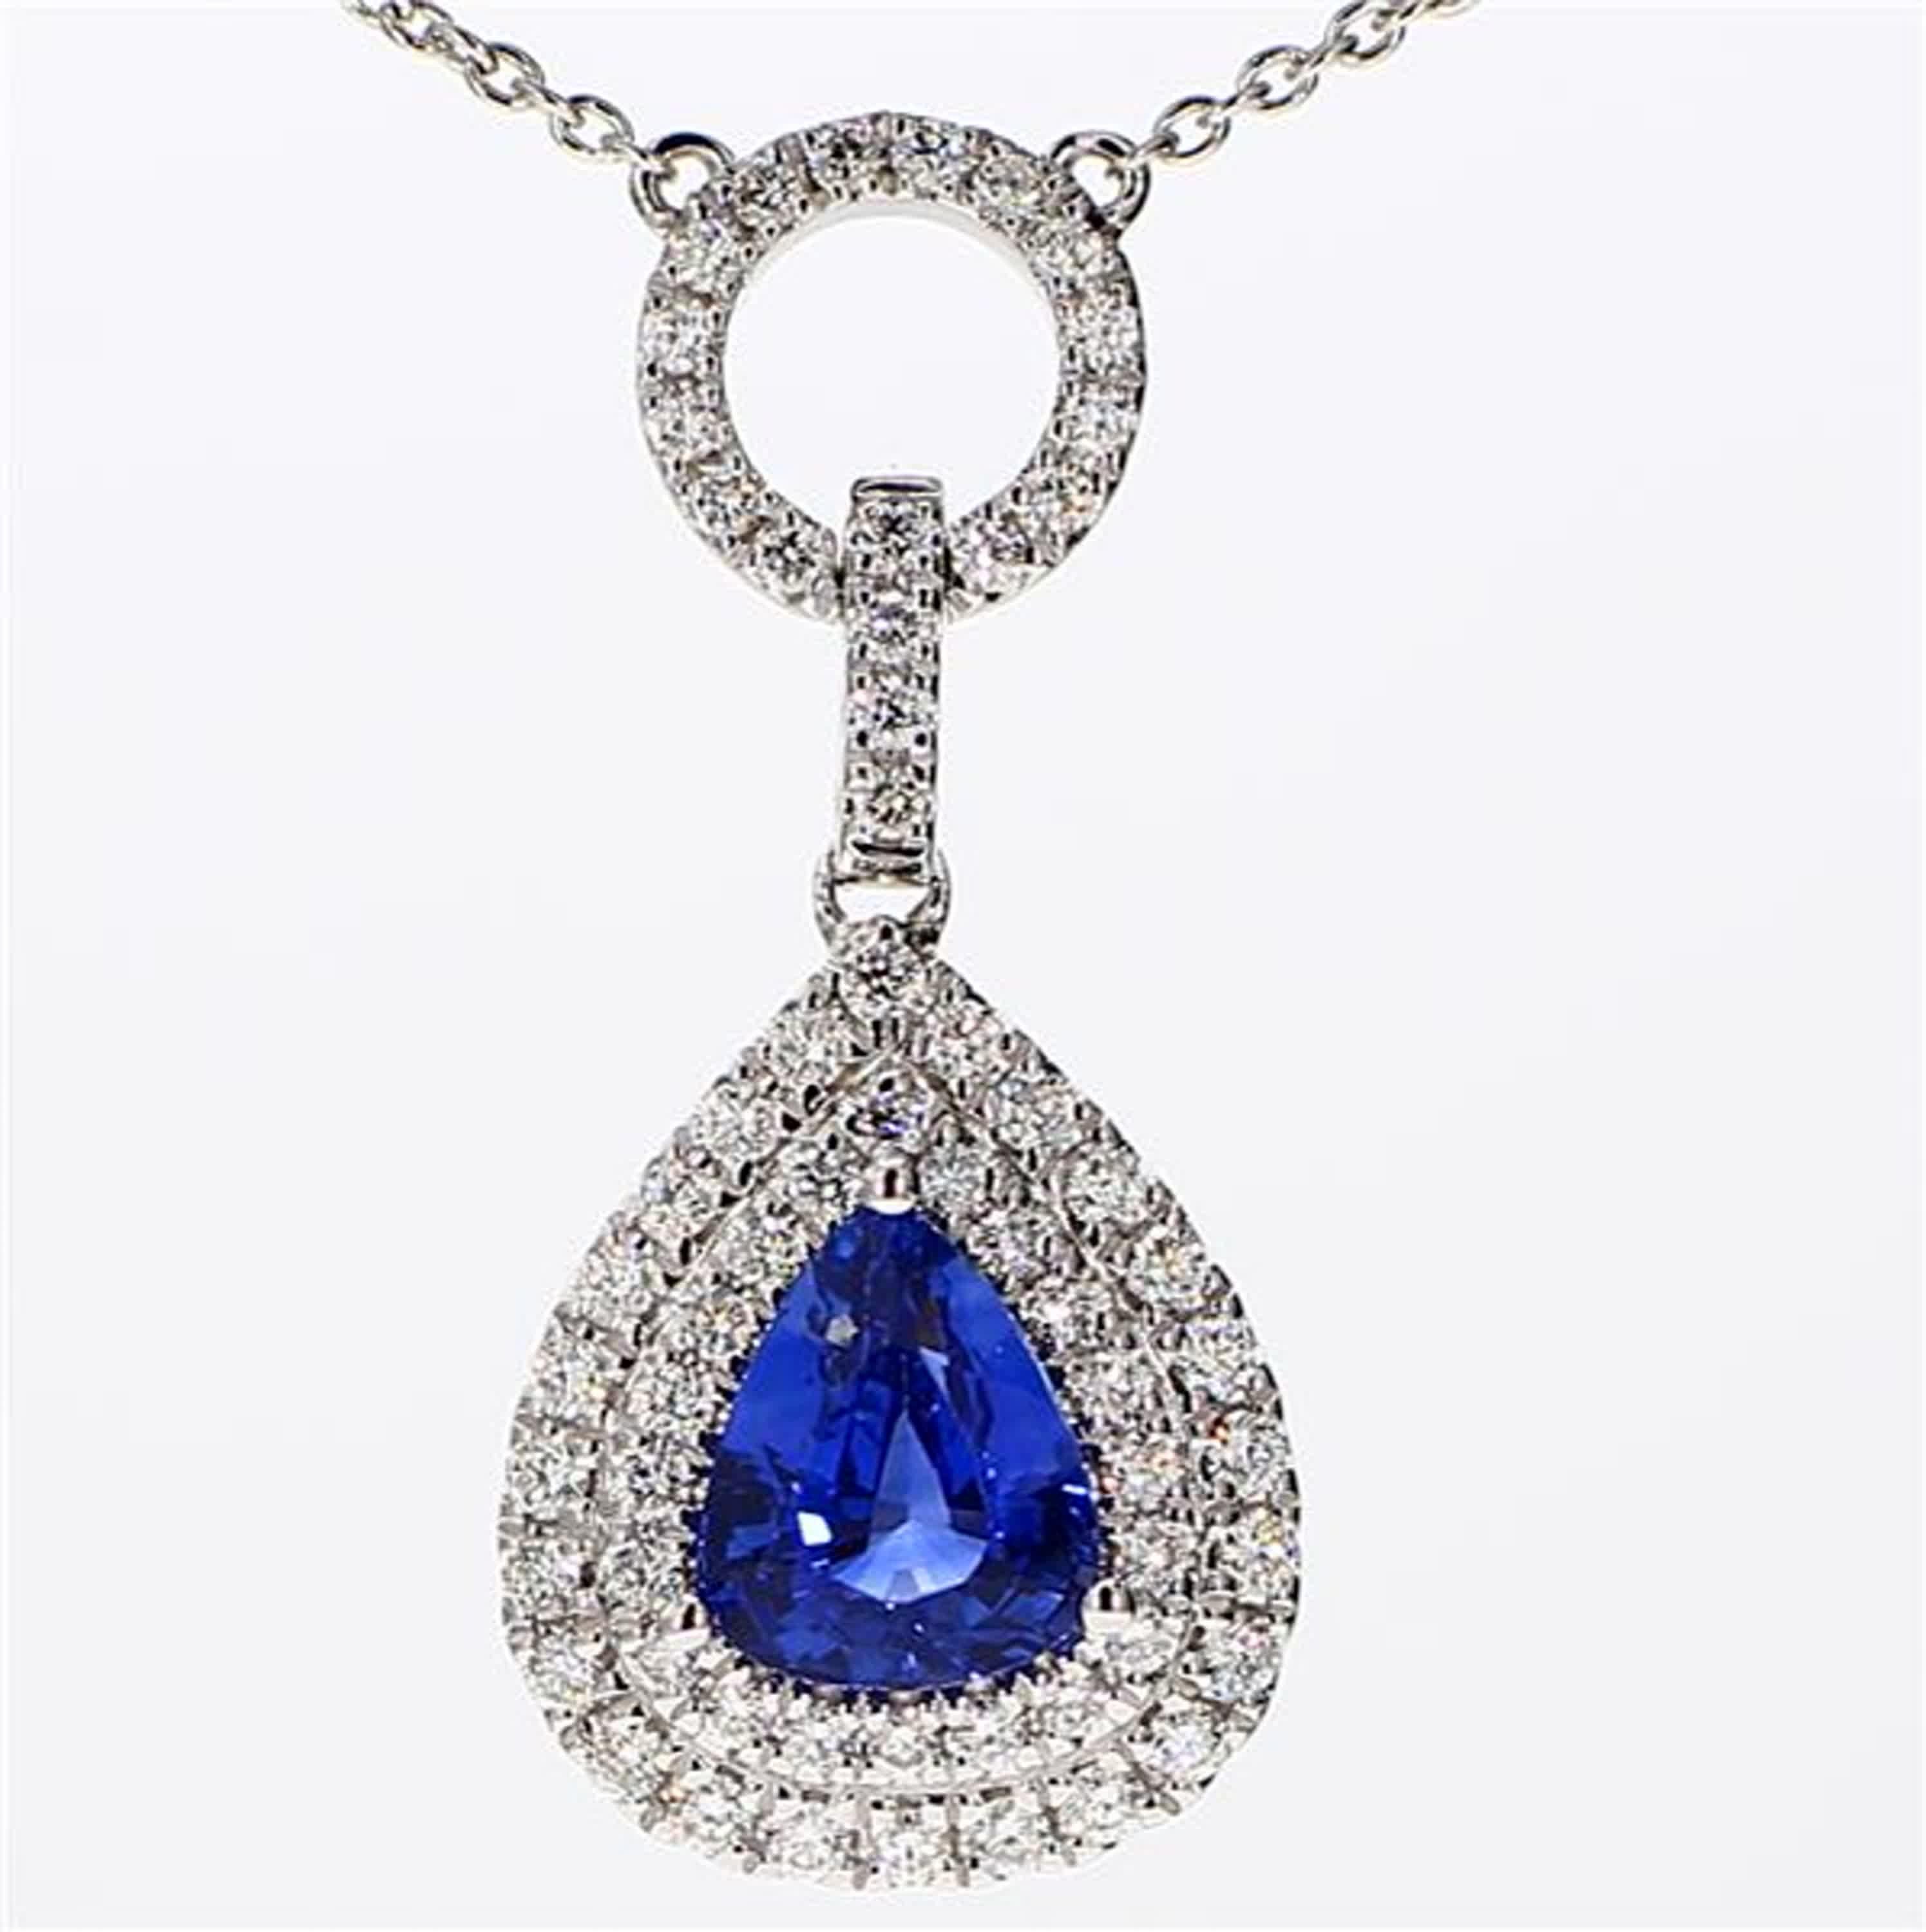 RareGemWorld's classic sapphire pendant. Mounted in a beautiful 18K White Gold setting with a natural pear cut blue sapphire. The sapphire is surrounded by natural round white diamond melee. This pendant is guaranteed to impress and enhance your